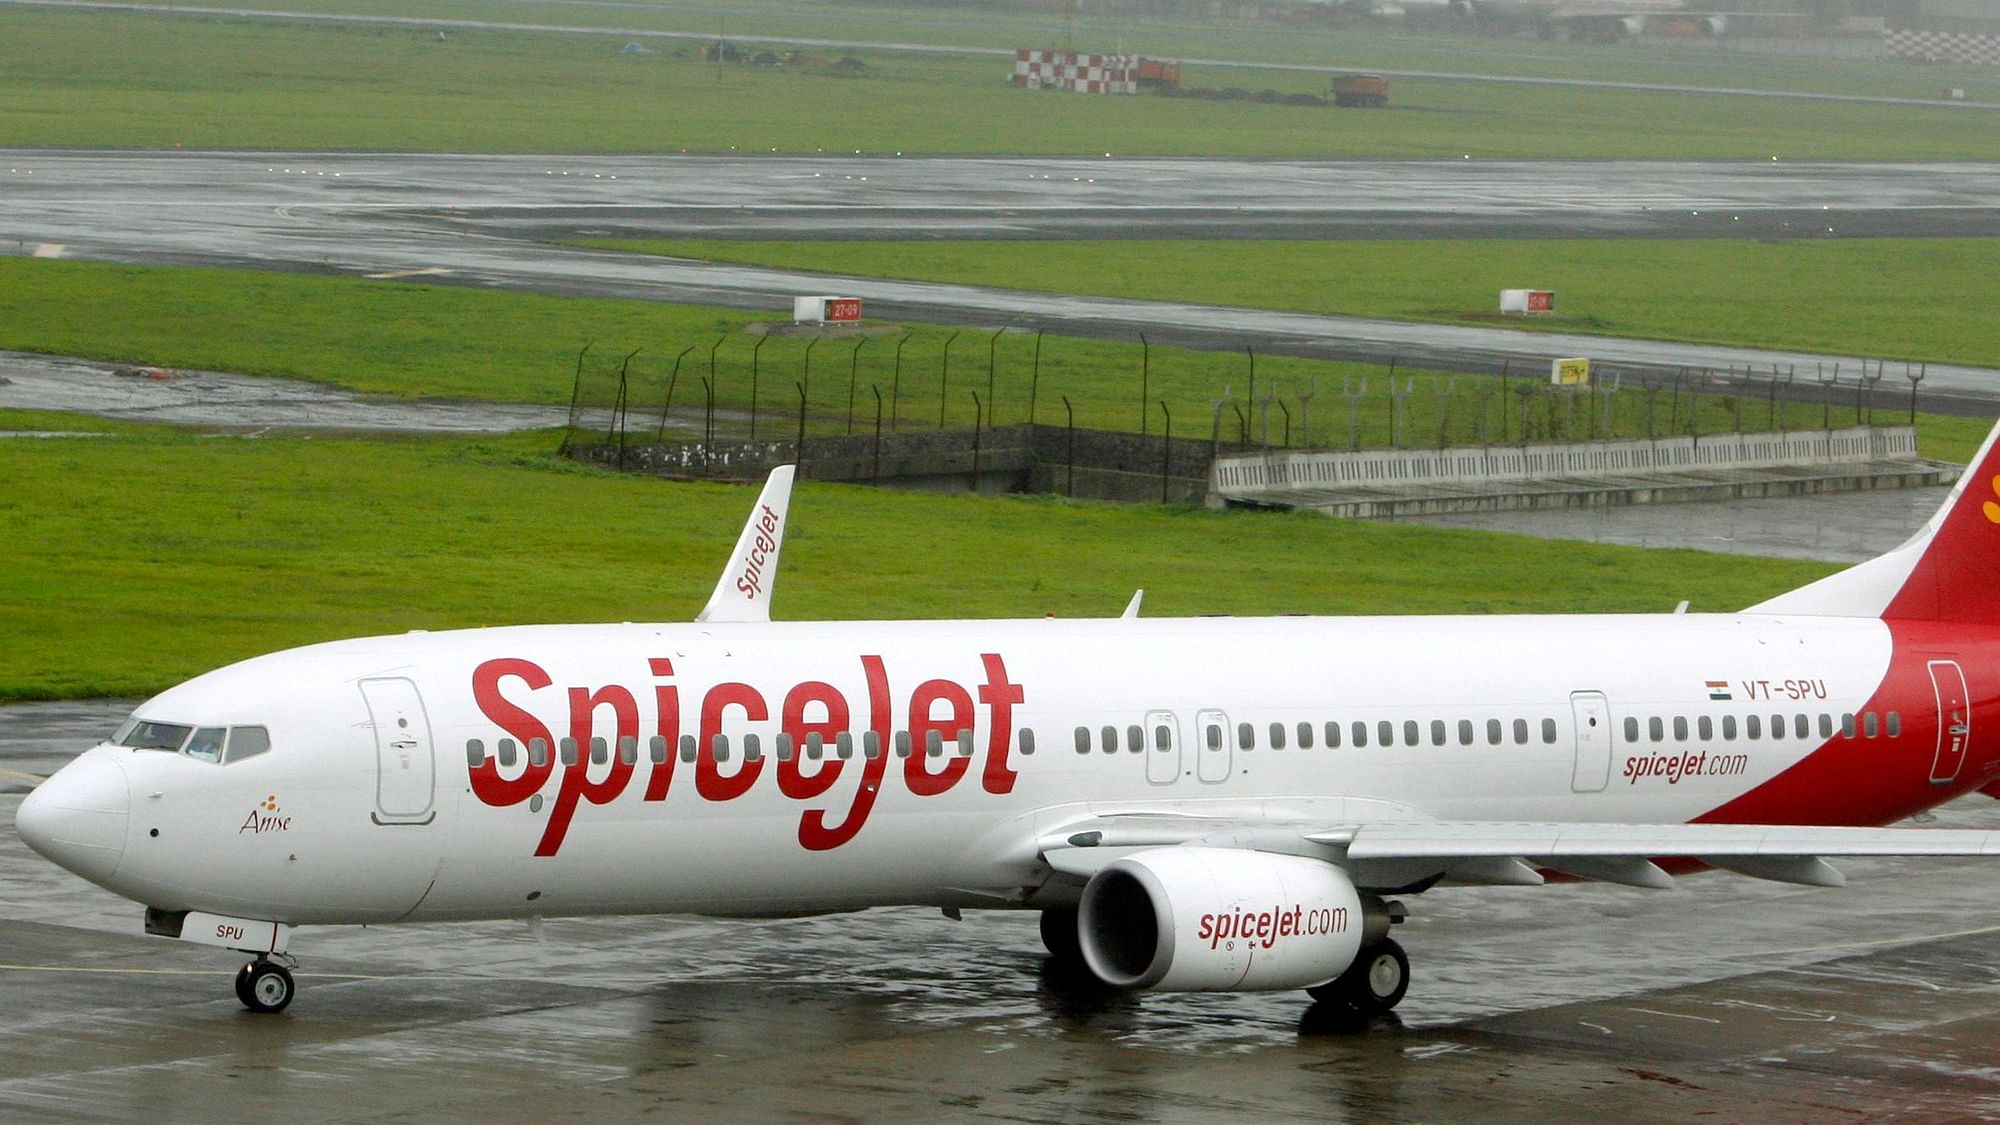 SpiceJet has stated that its employees’ salaries would be reduced between 10 to 30 per cent.